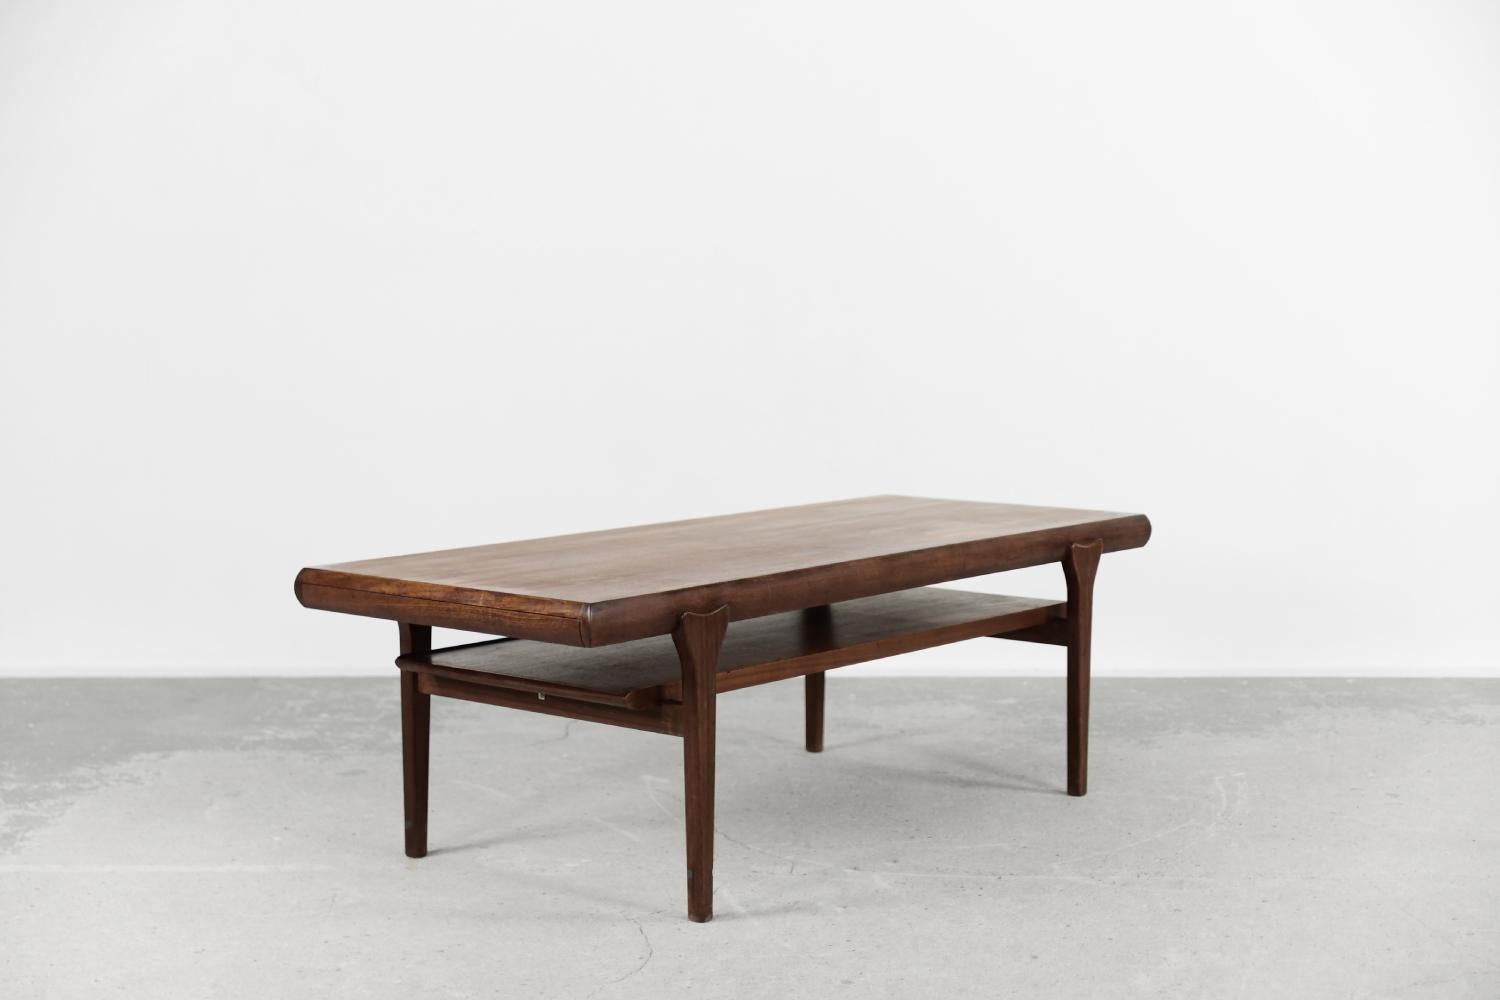 Danish Vintage Mid-century Modern Scandinavian Extendable Teak Coffee Table with Drawer For Sale